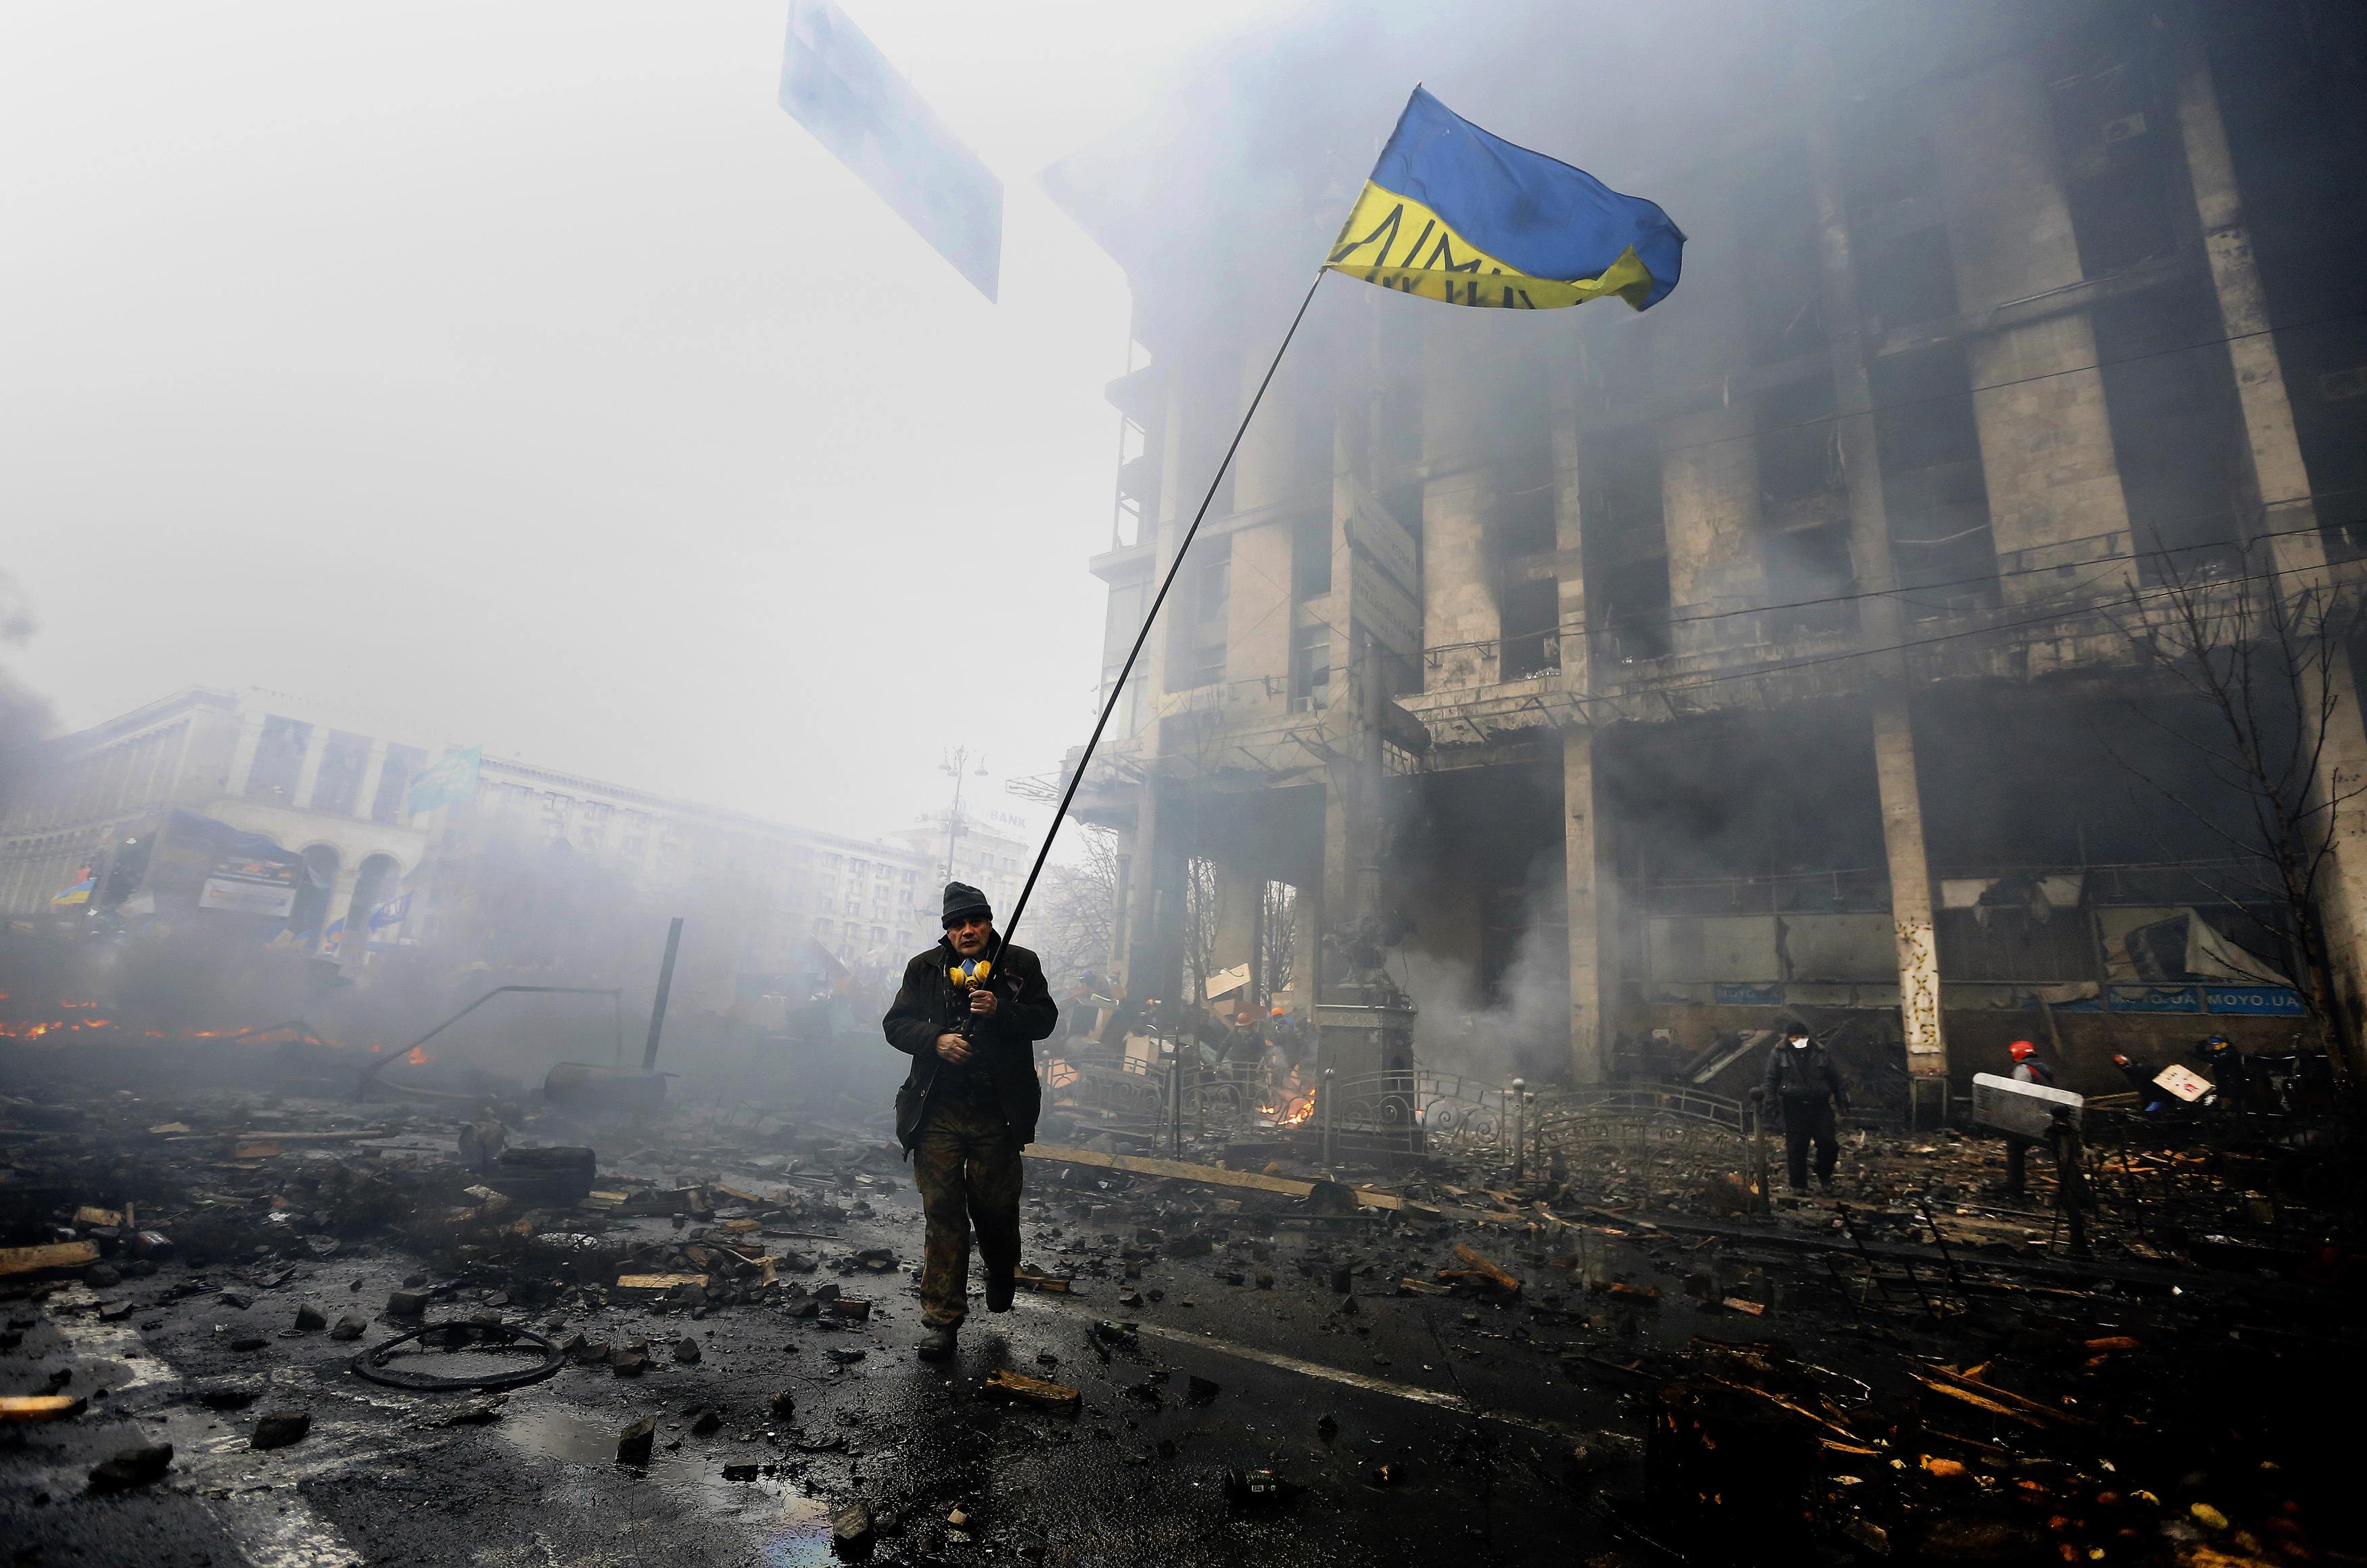 An anti-government protester holds a Ukranian flag as he advances through burning barricades in Kiev